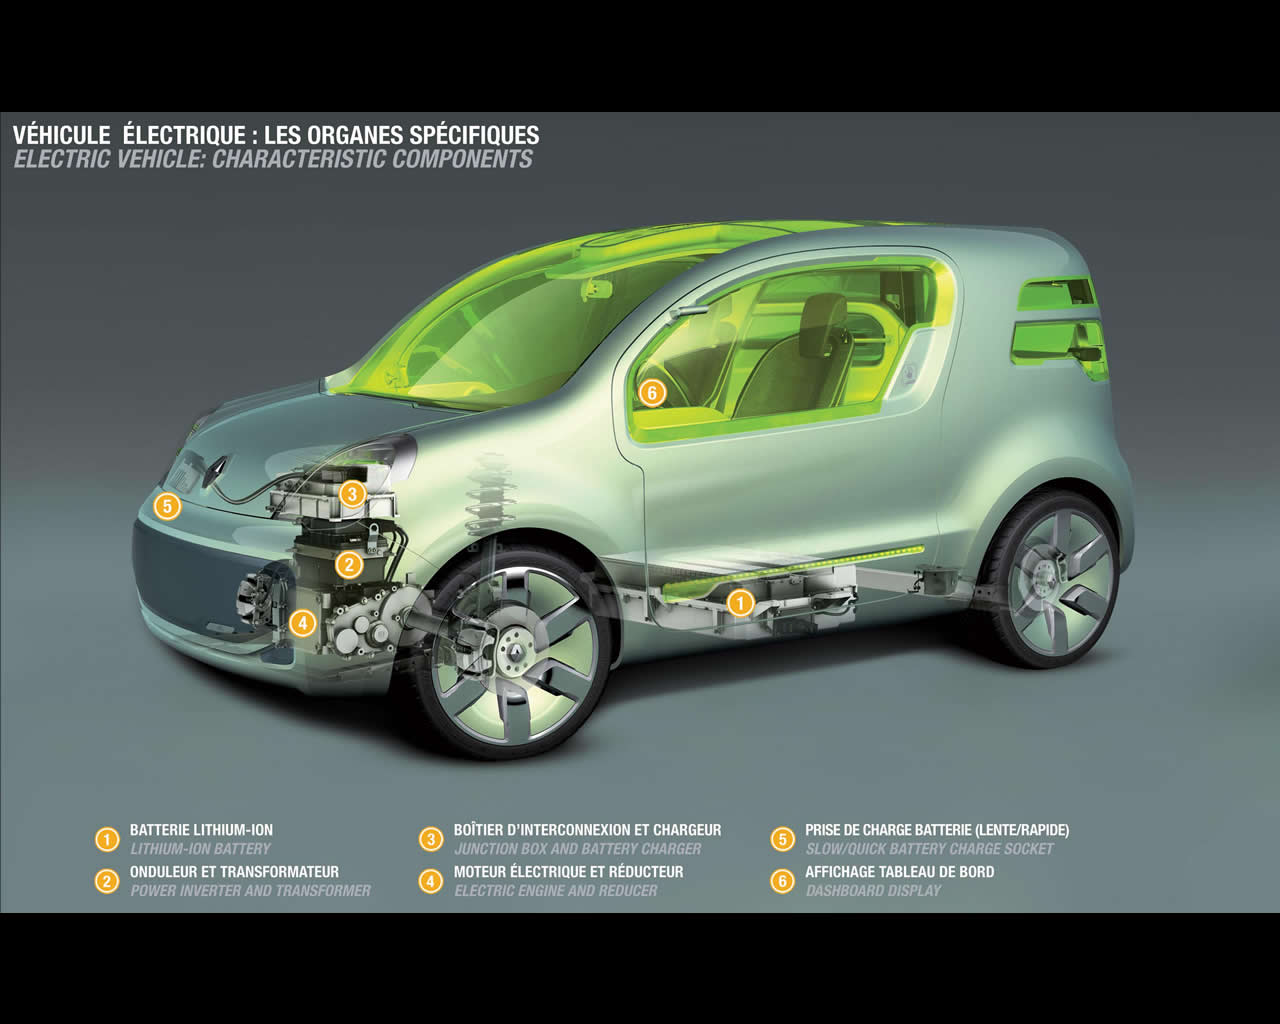 Nissan renault electric vehicles